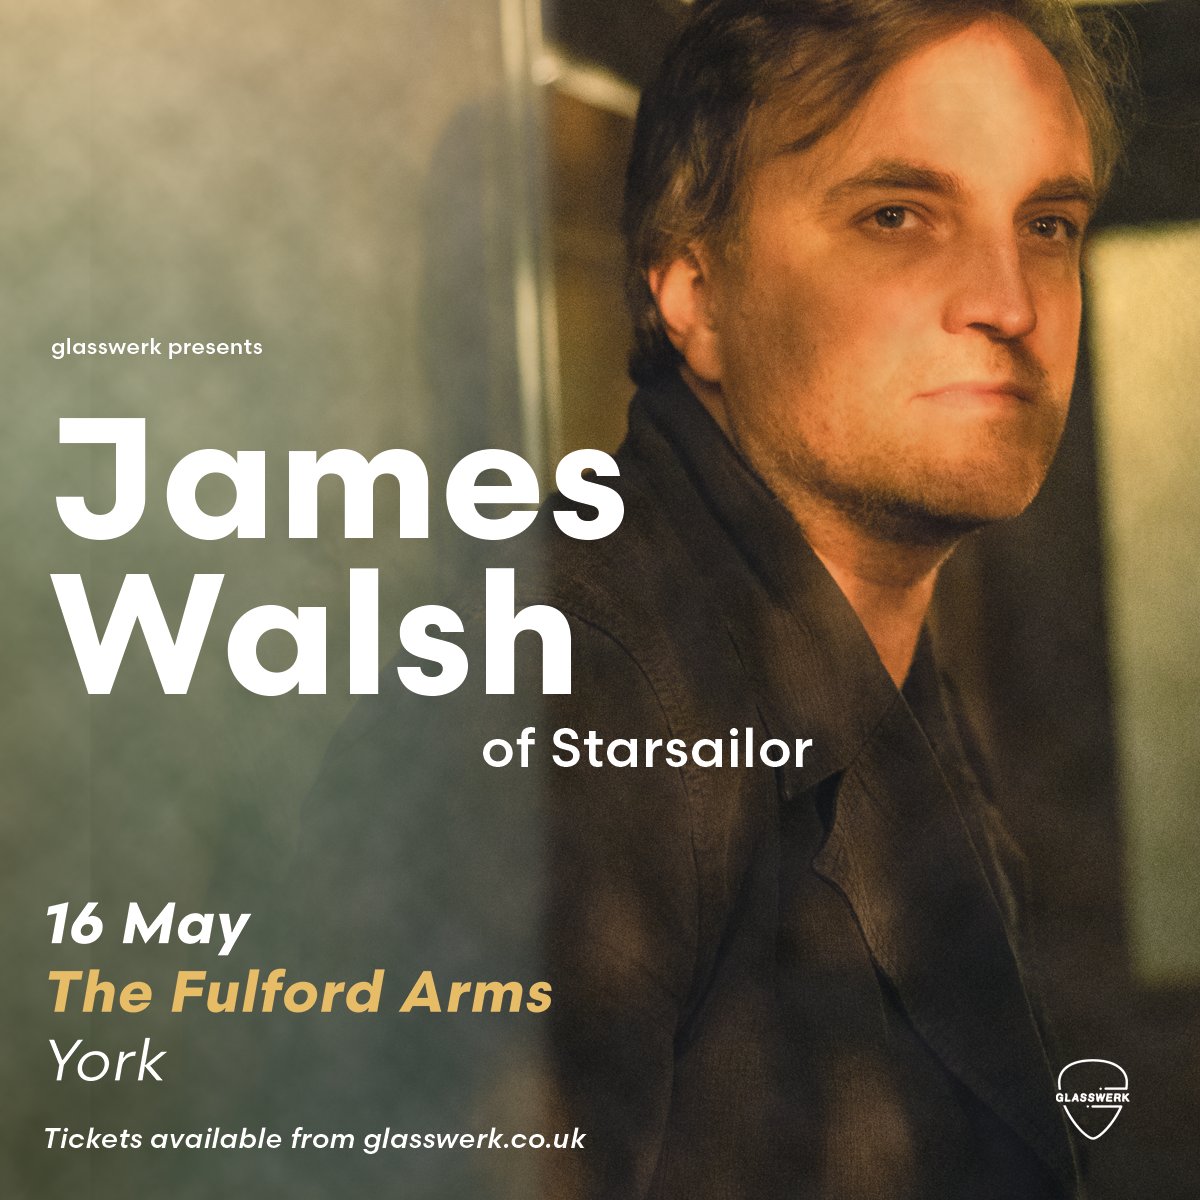 James Walsh of @starsailorband fame is bringing his solo show right here on Thursday 16th May! We're Four To The Floor on this one - Tickets On Sale Now! eventim.co.uk/event/james-wa…